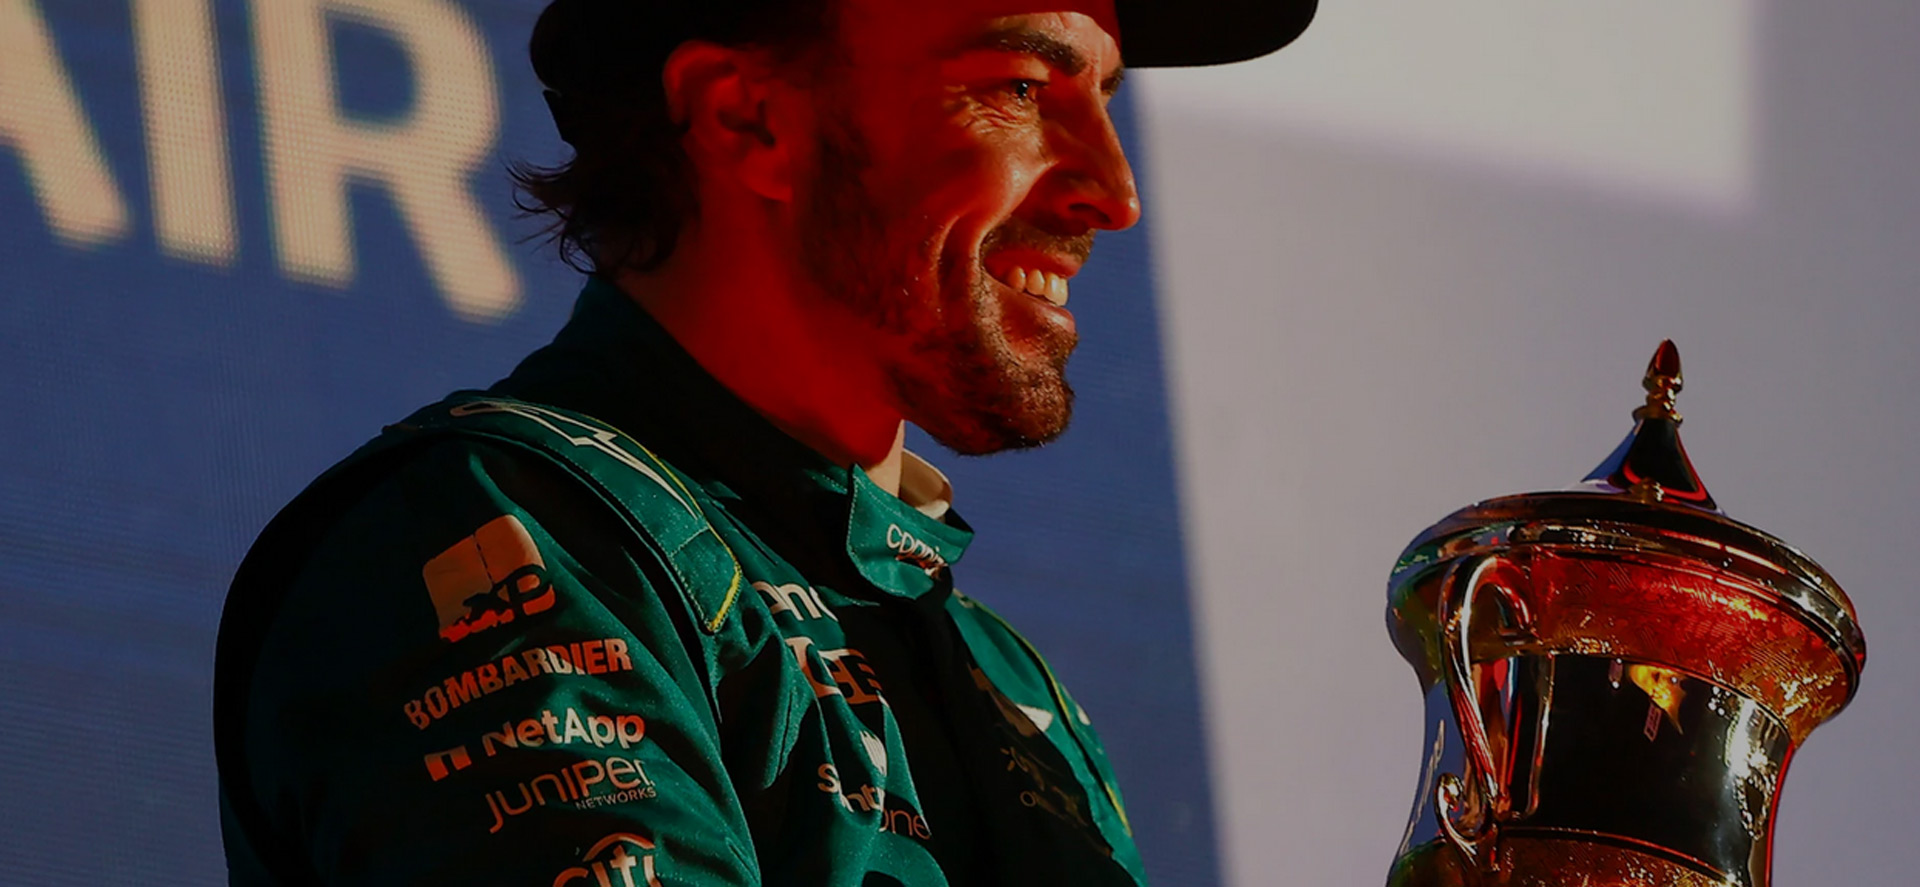 Alonso signs multi-year deal with Aston Martin, ruling out Mercedes switch Auto Recent